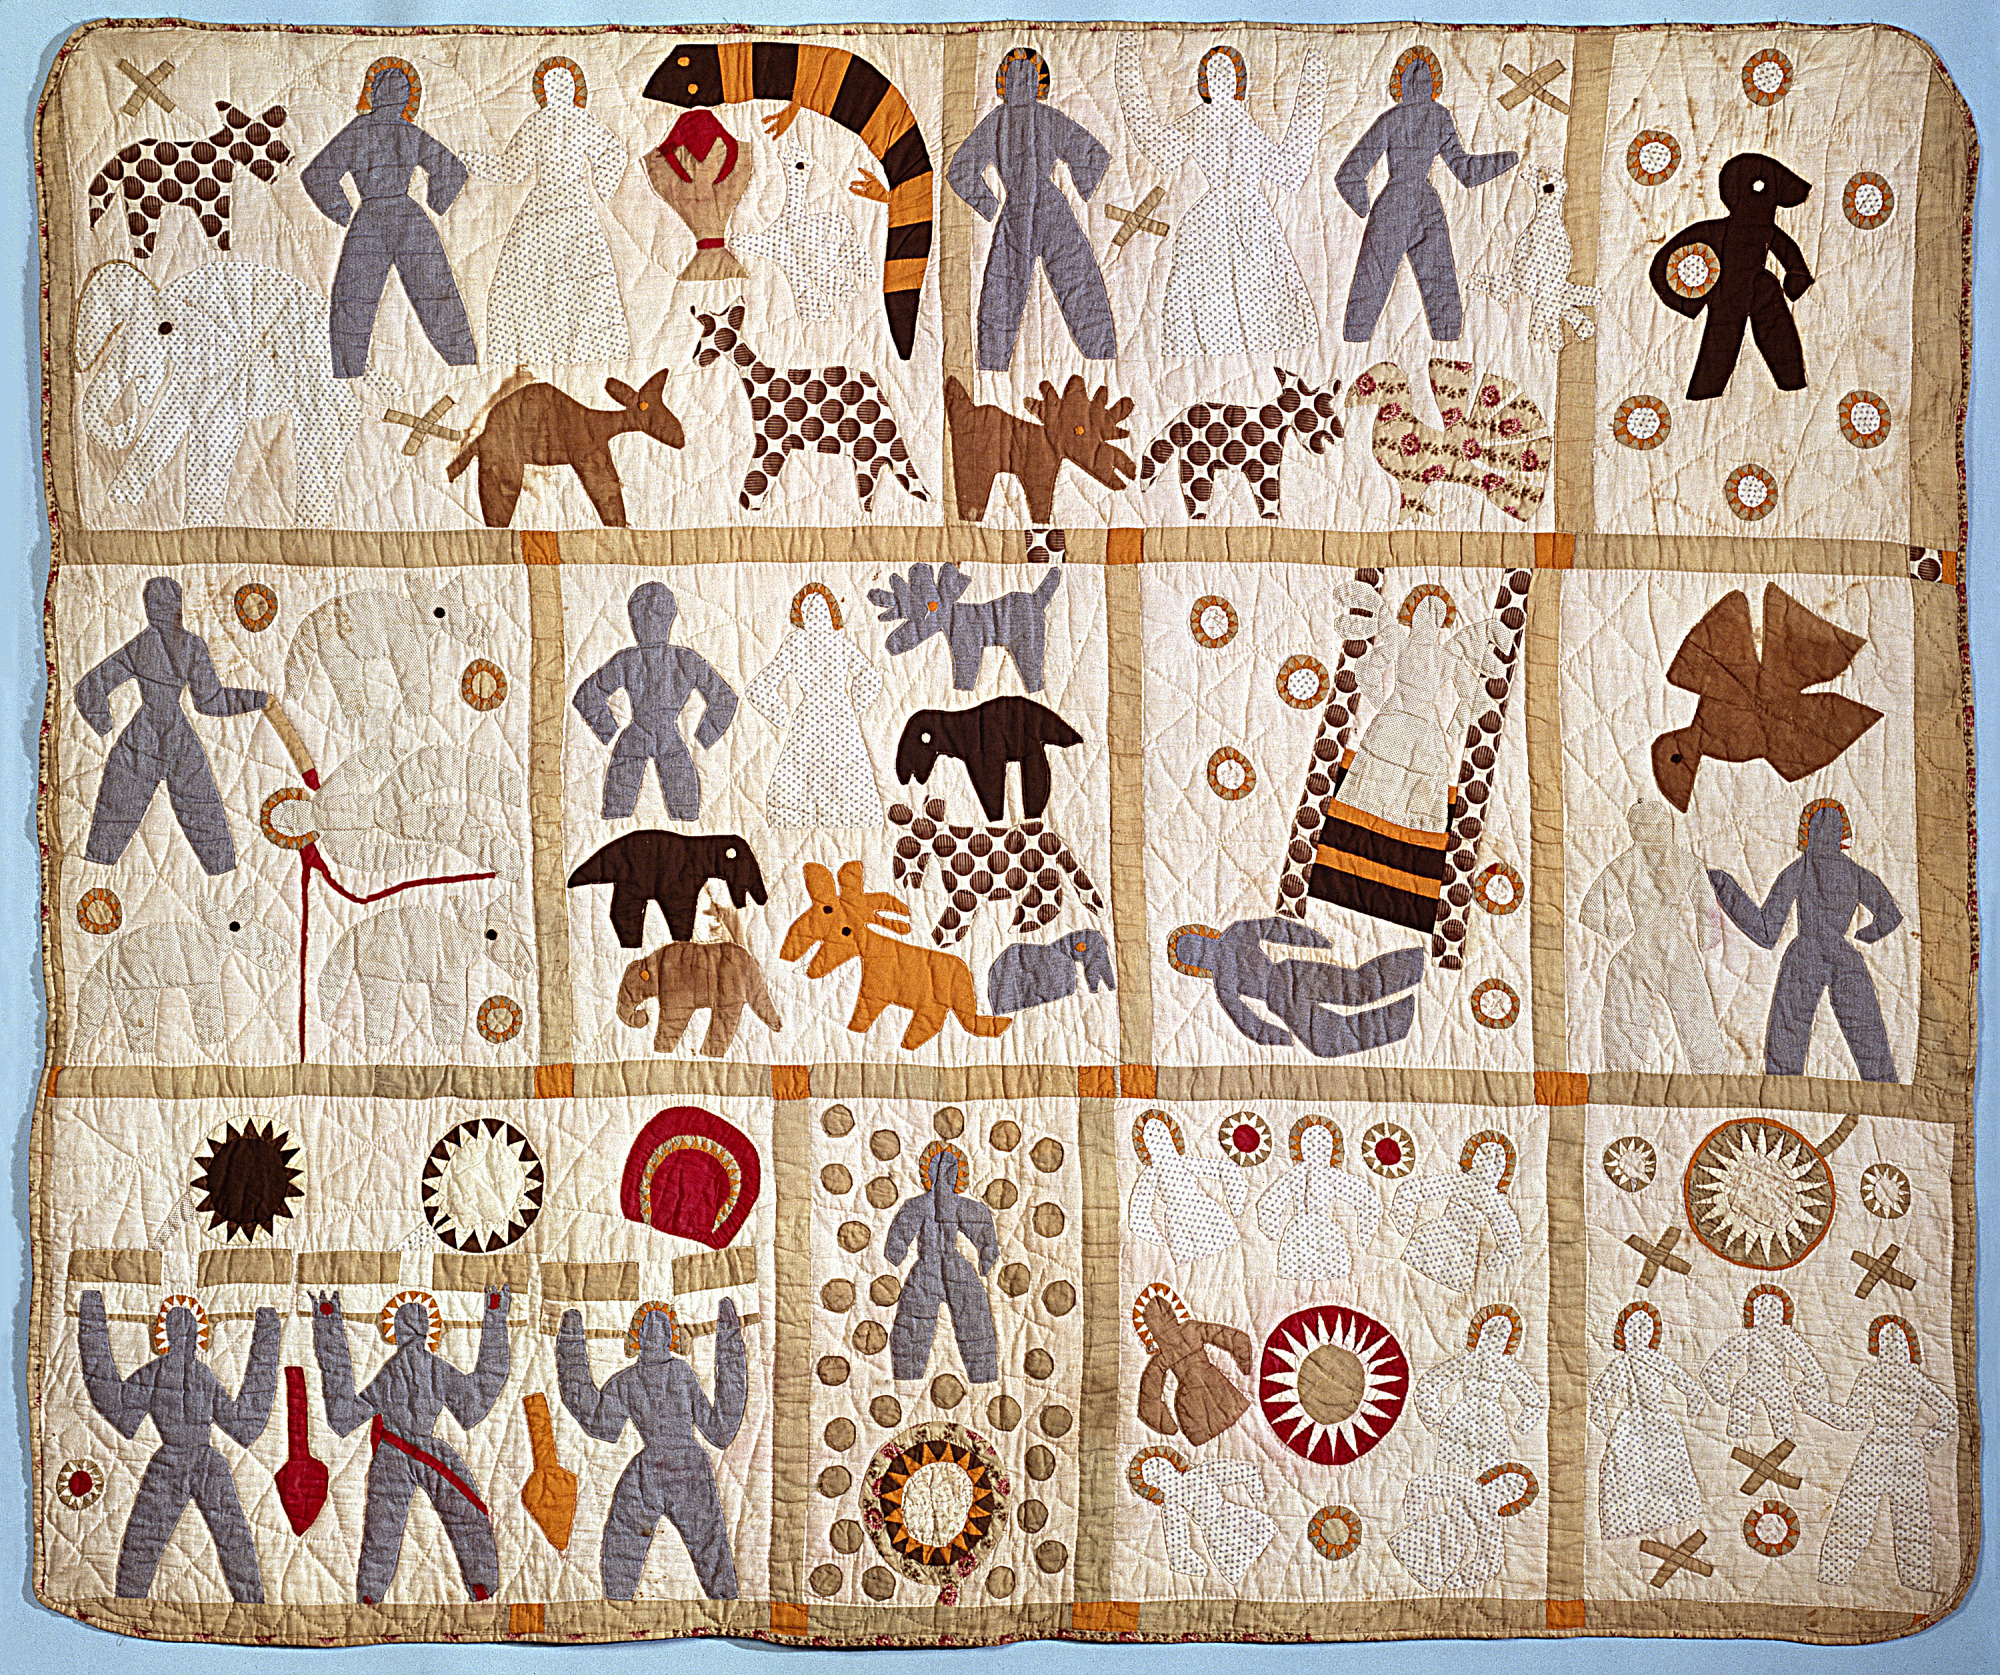 Biblical Quilt by Harriet Powers - c. 1886 - 191 x 227 cm National Museum of African-American History & Culture